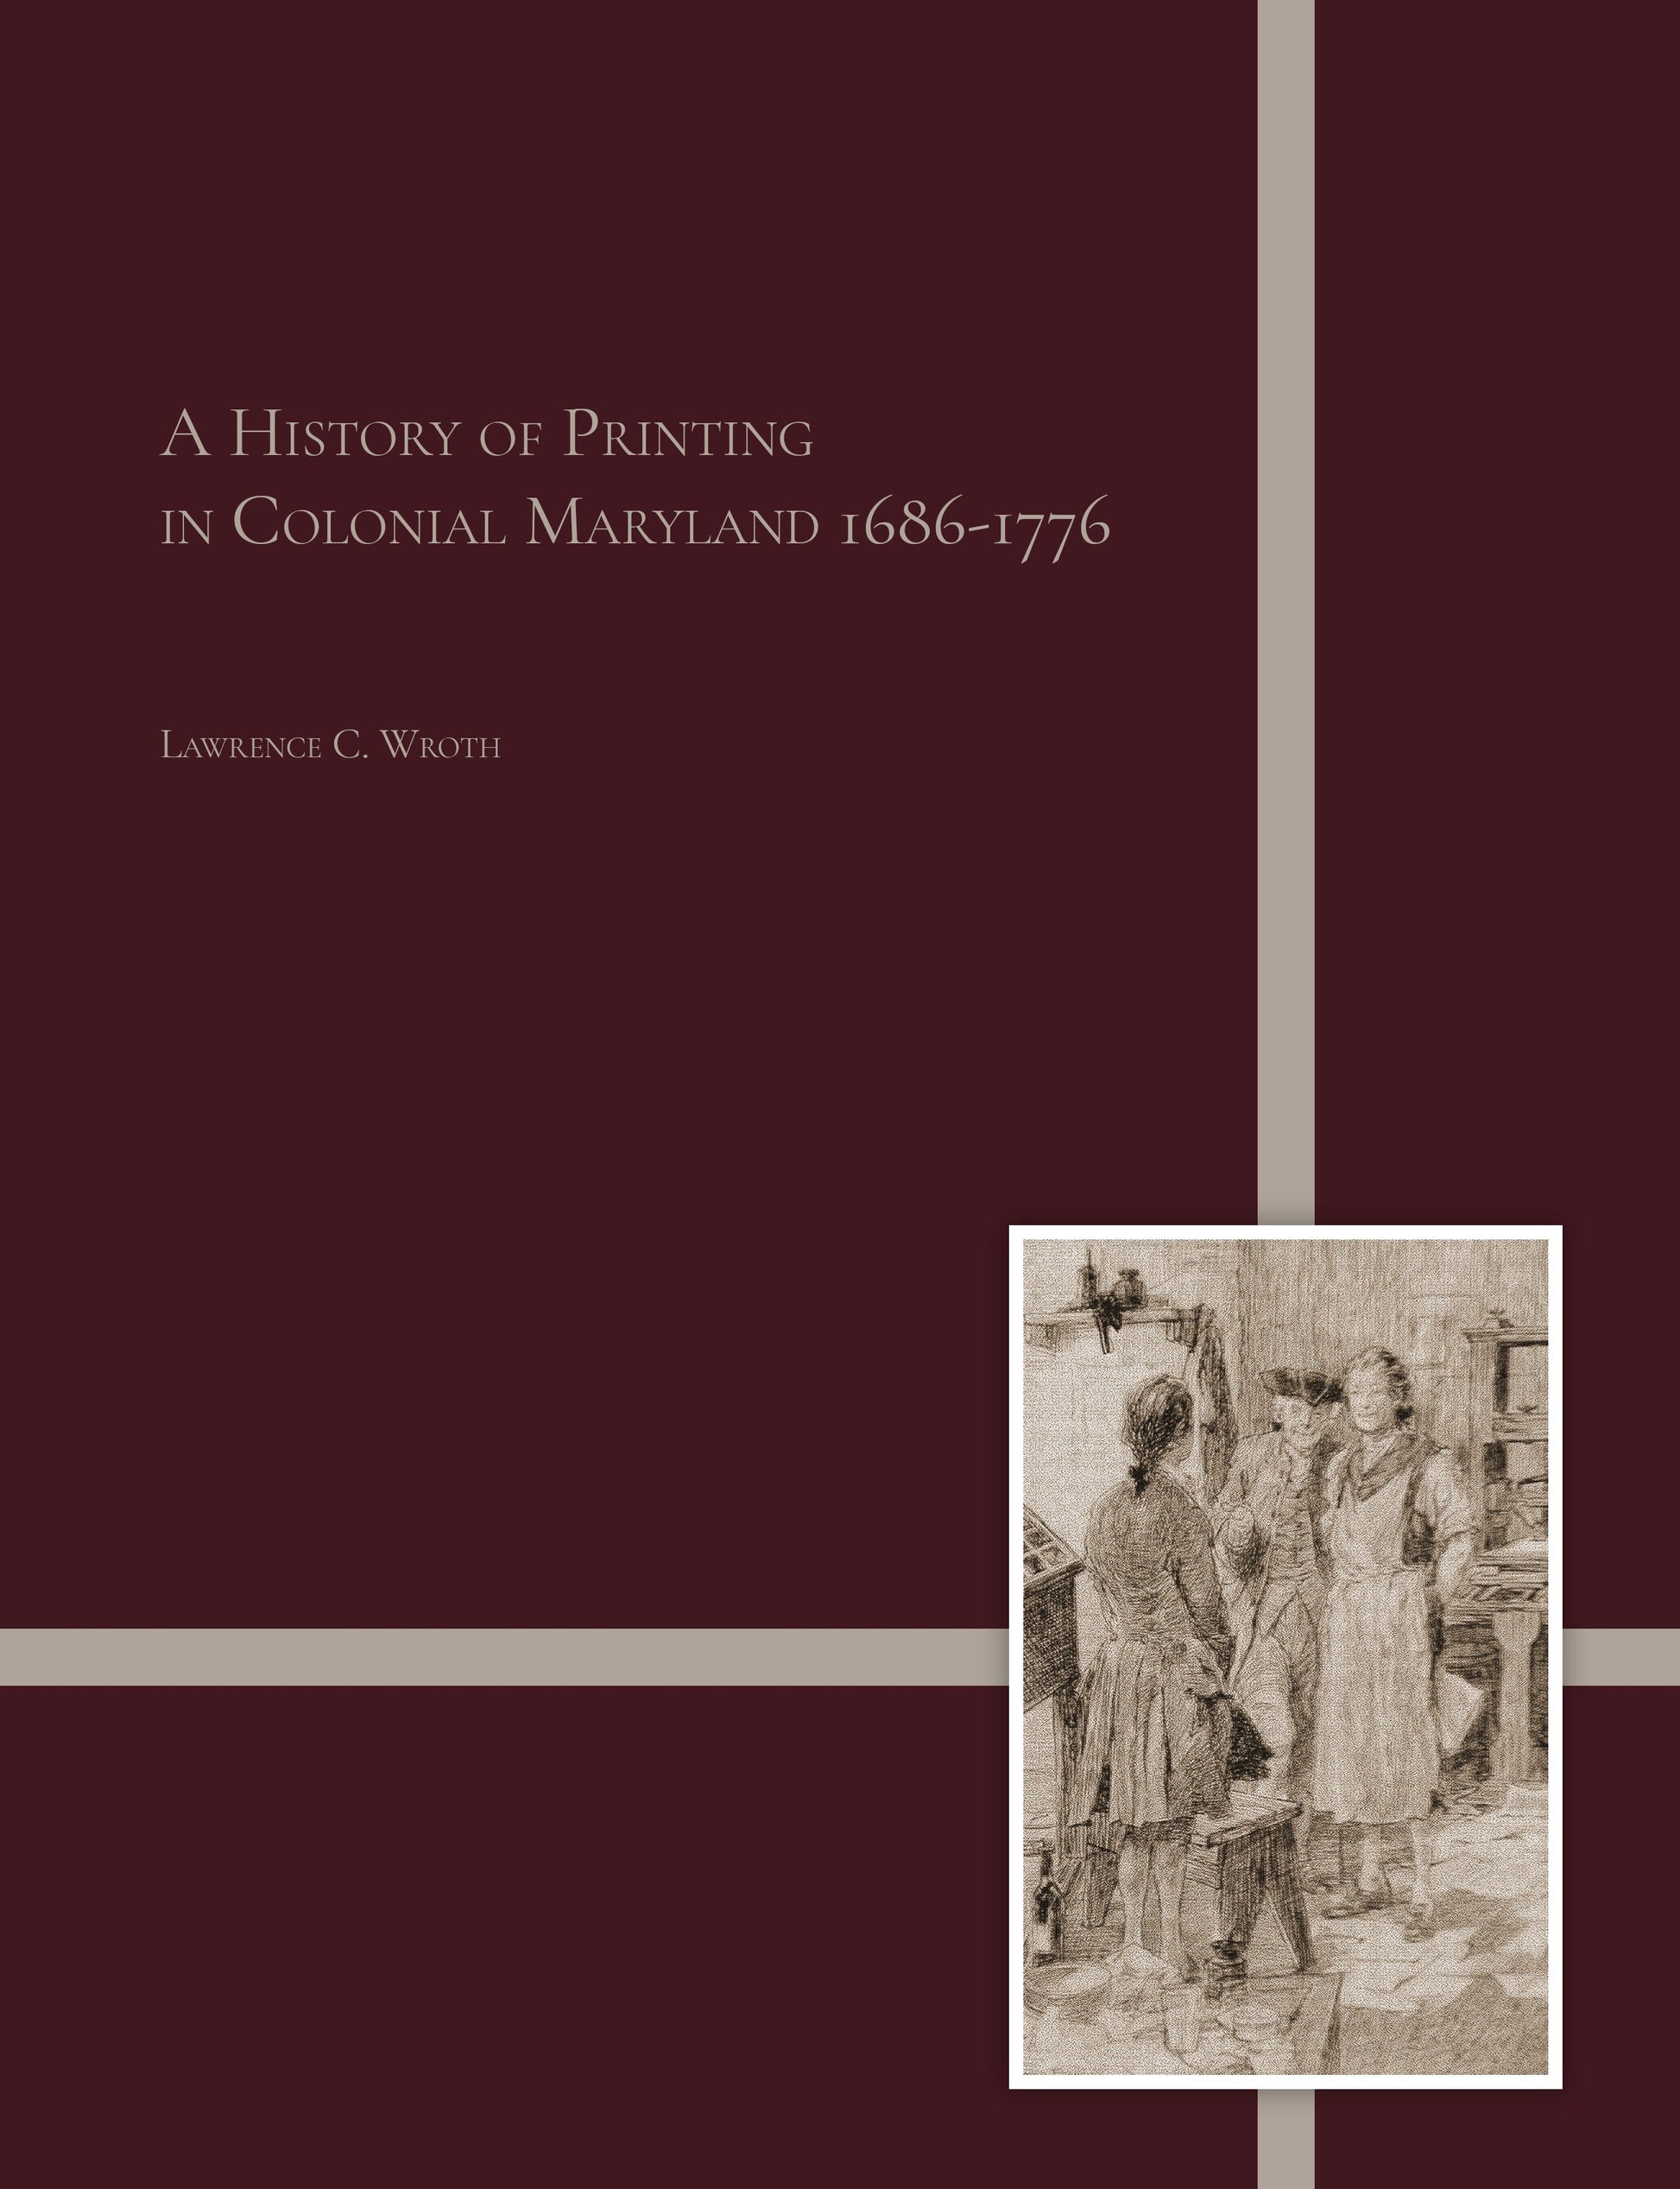 A History of Printing in Colonial Maryland 1686-1776